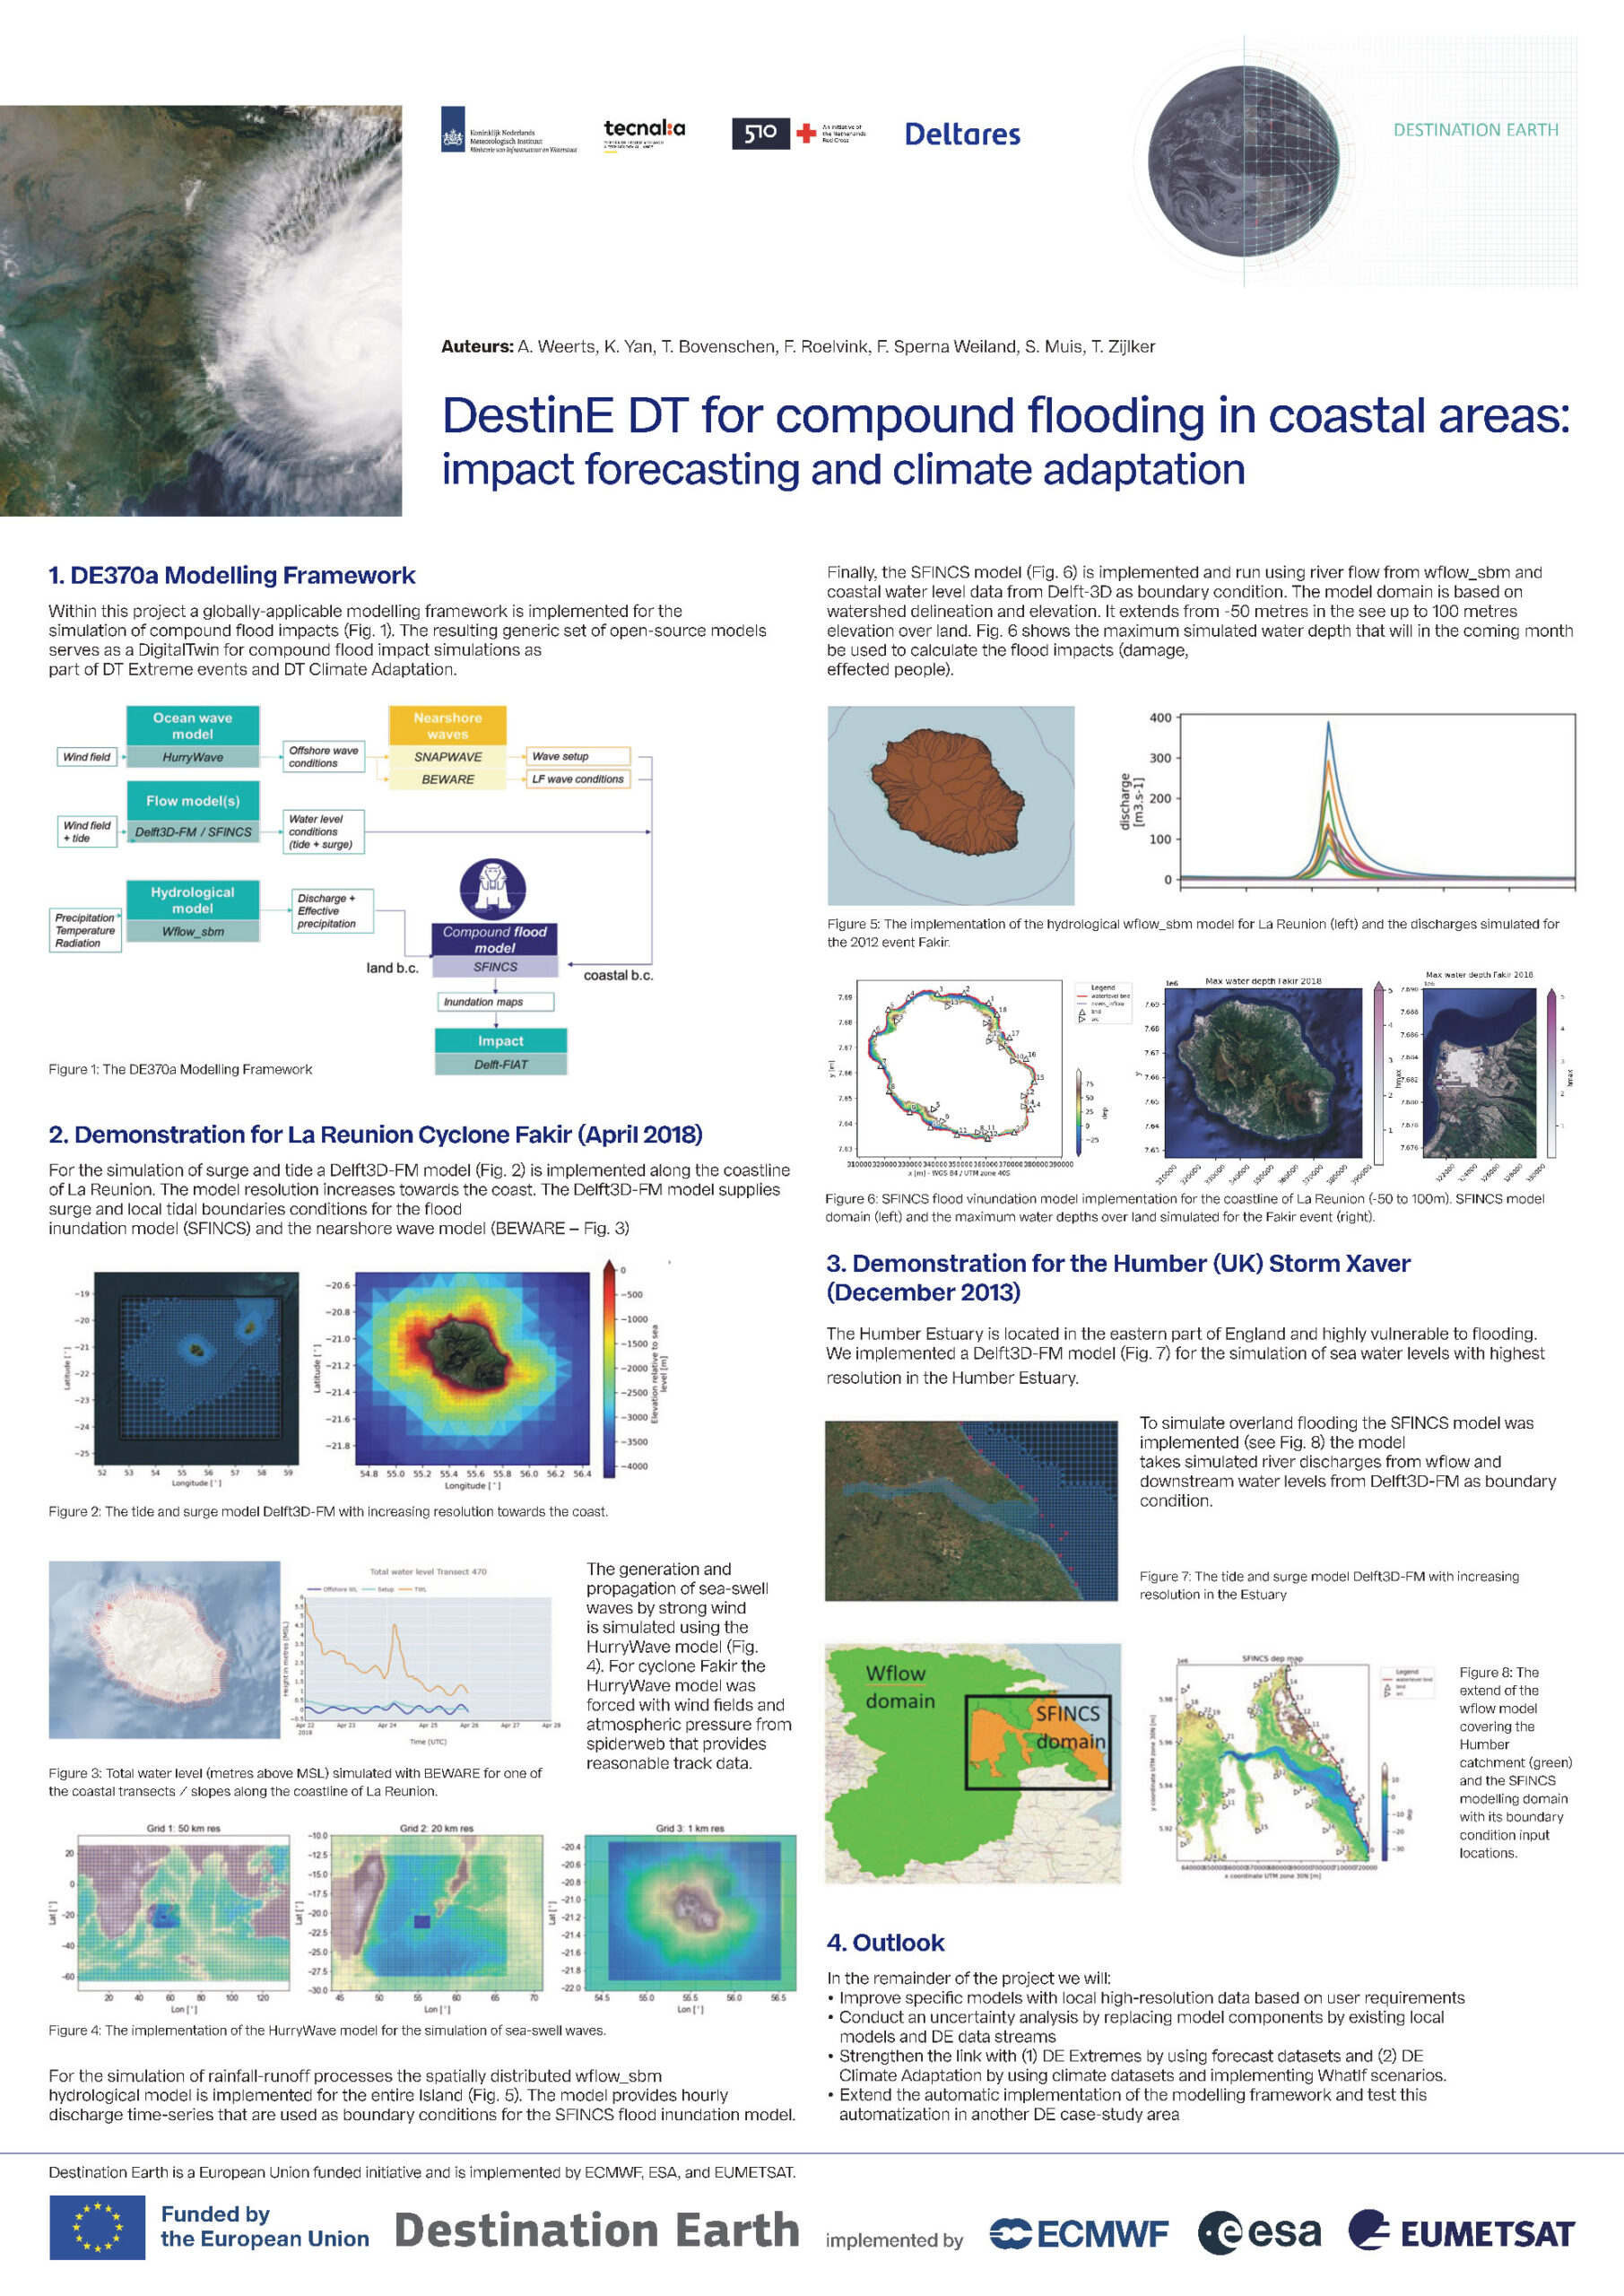 DestinE DT for compound flooding in coastal areas impact forecasting and climate adaptation